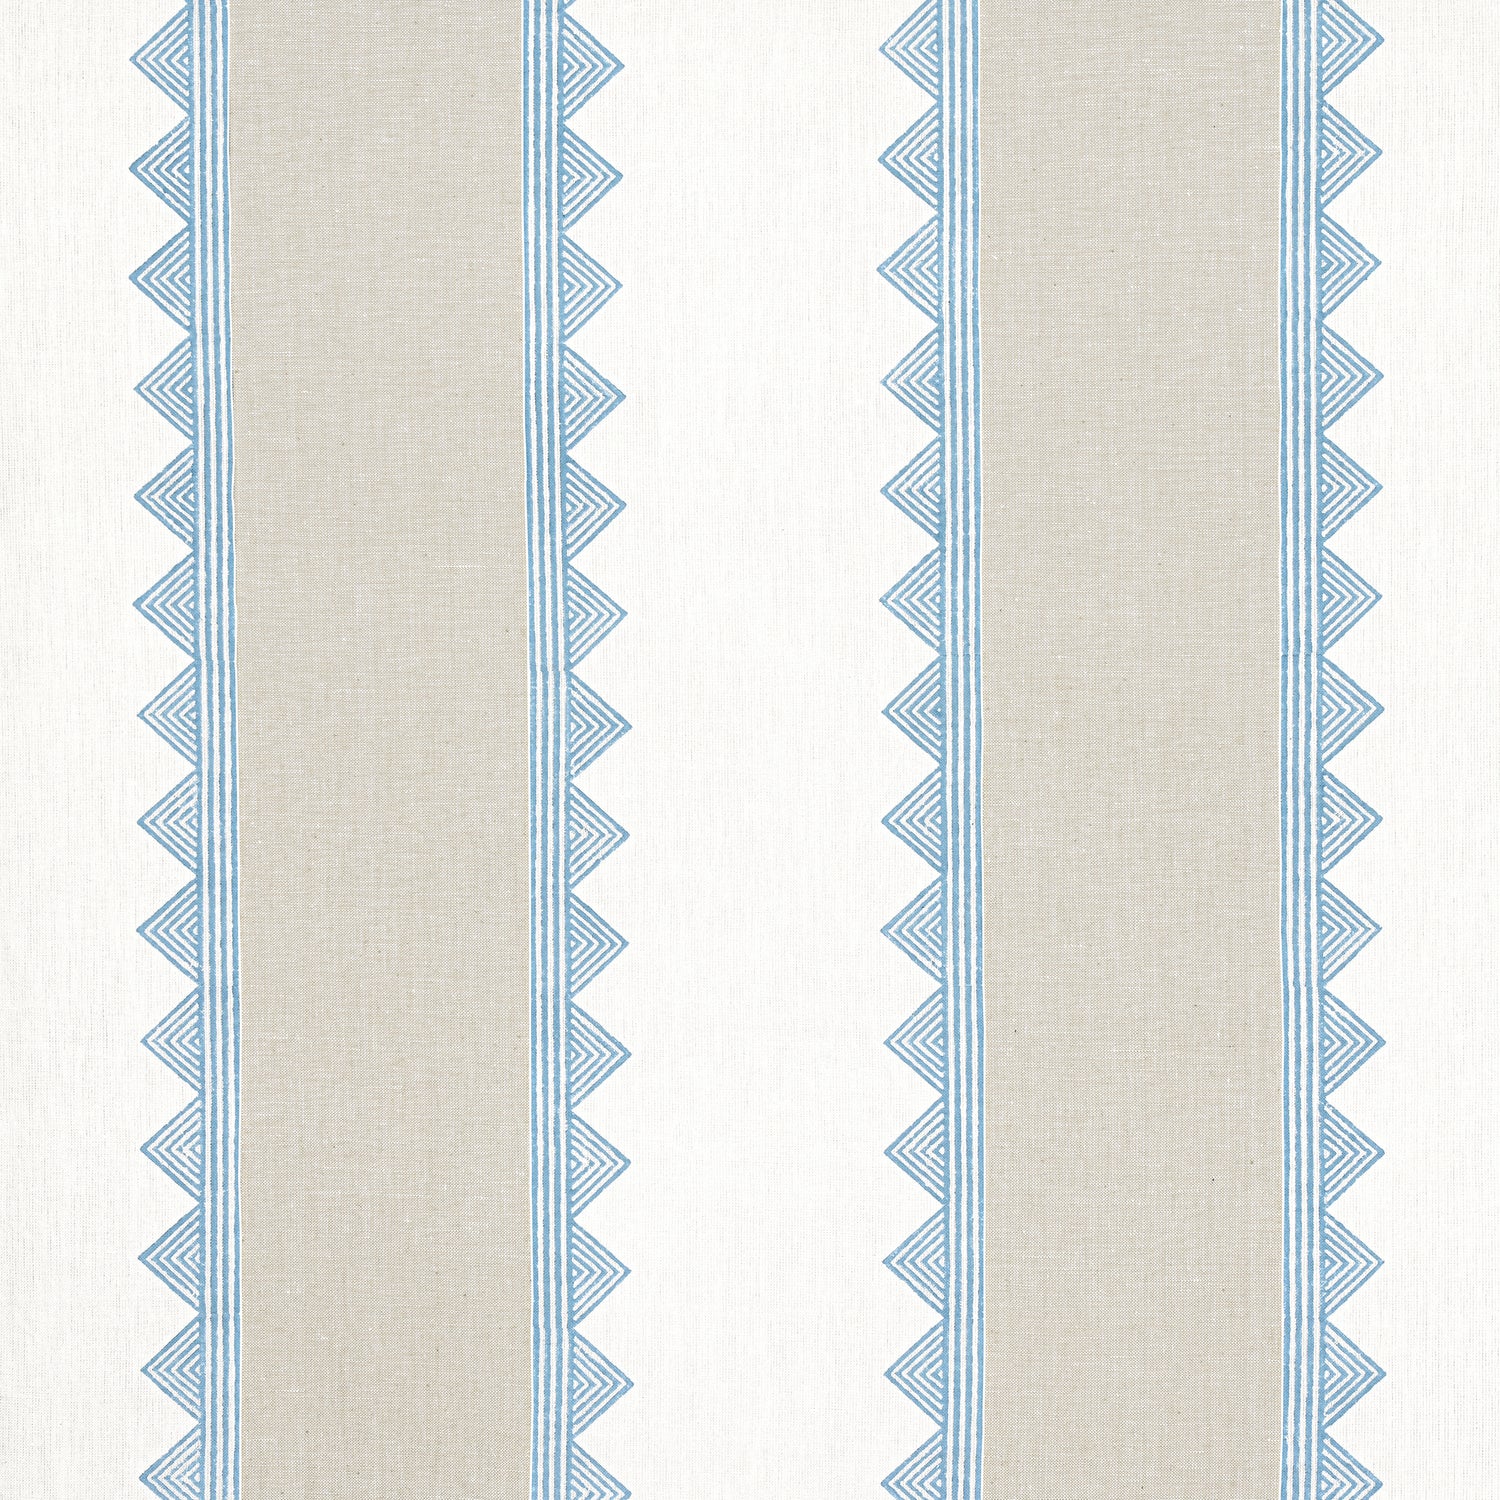 Kismet Stripe fabric in french blue color - pattern number F916228 - by Thibaut in the Kismet collection